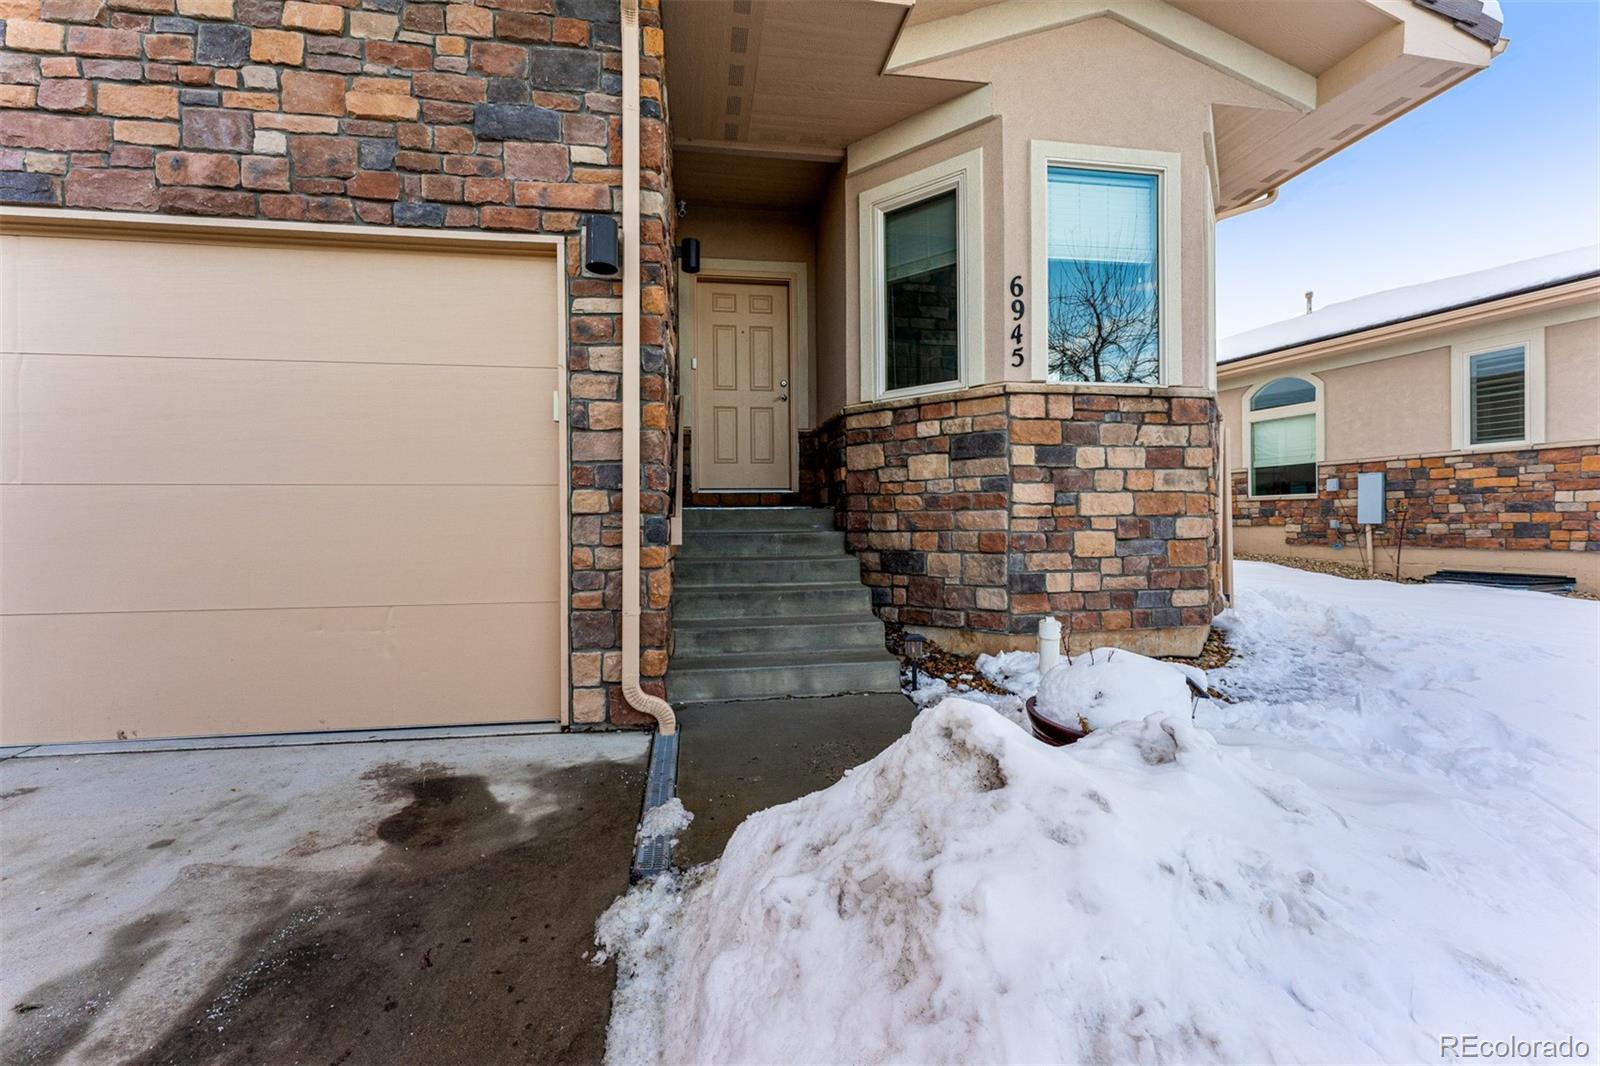 6945  fargo trail, Littleton sold home. Closed on 2024-04-19 for $682,500.